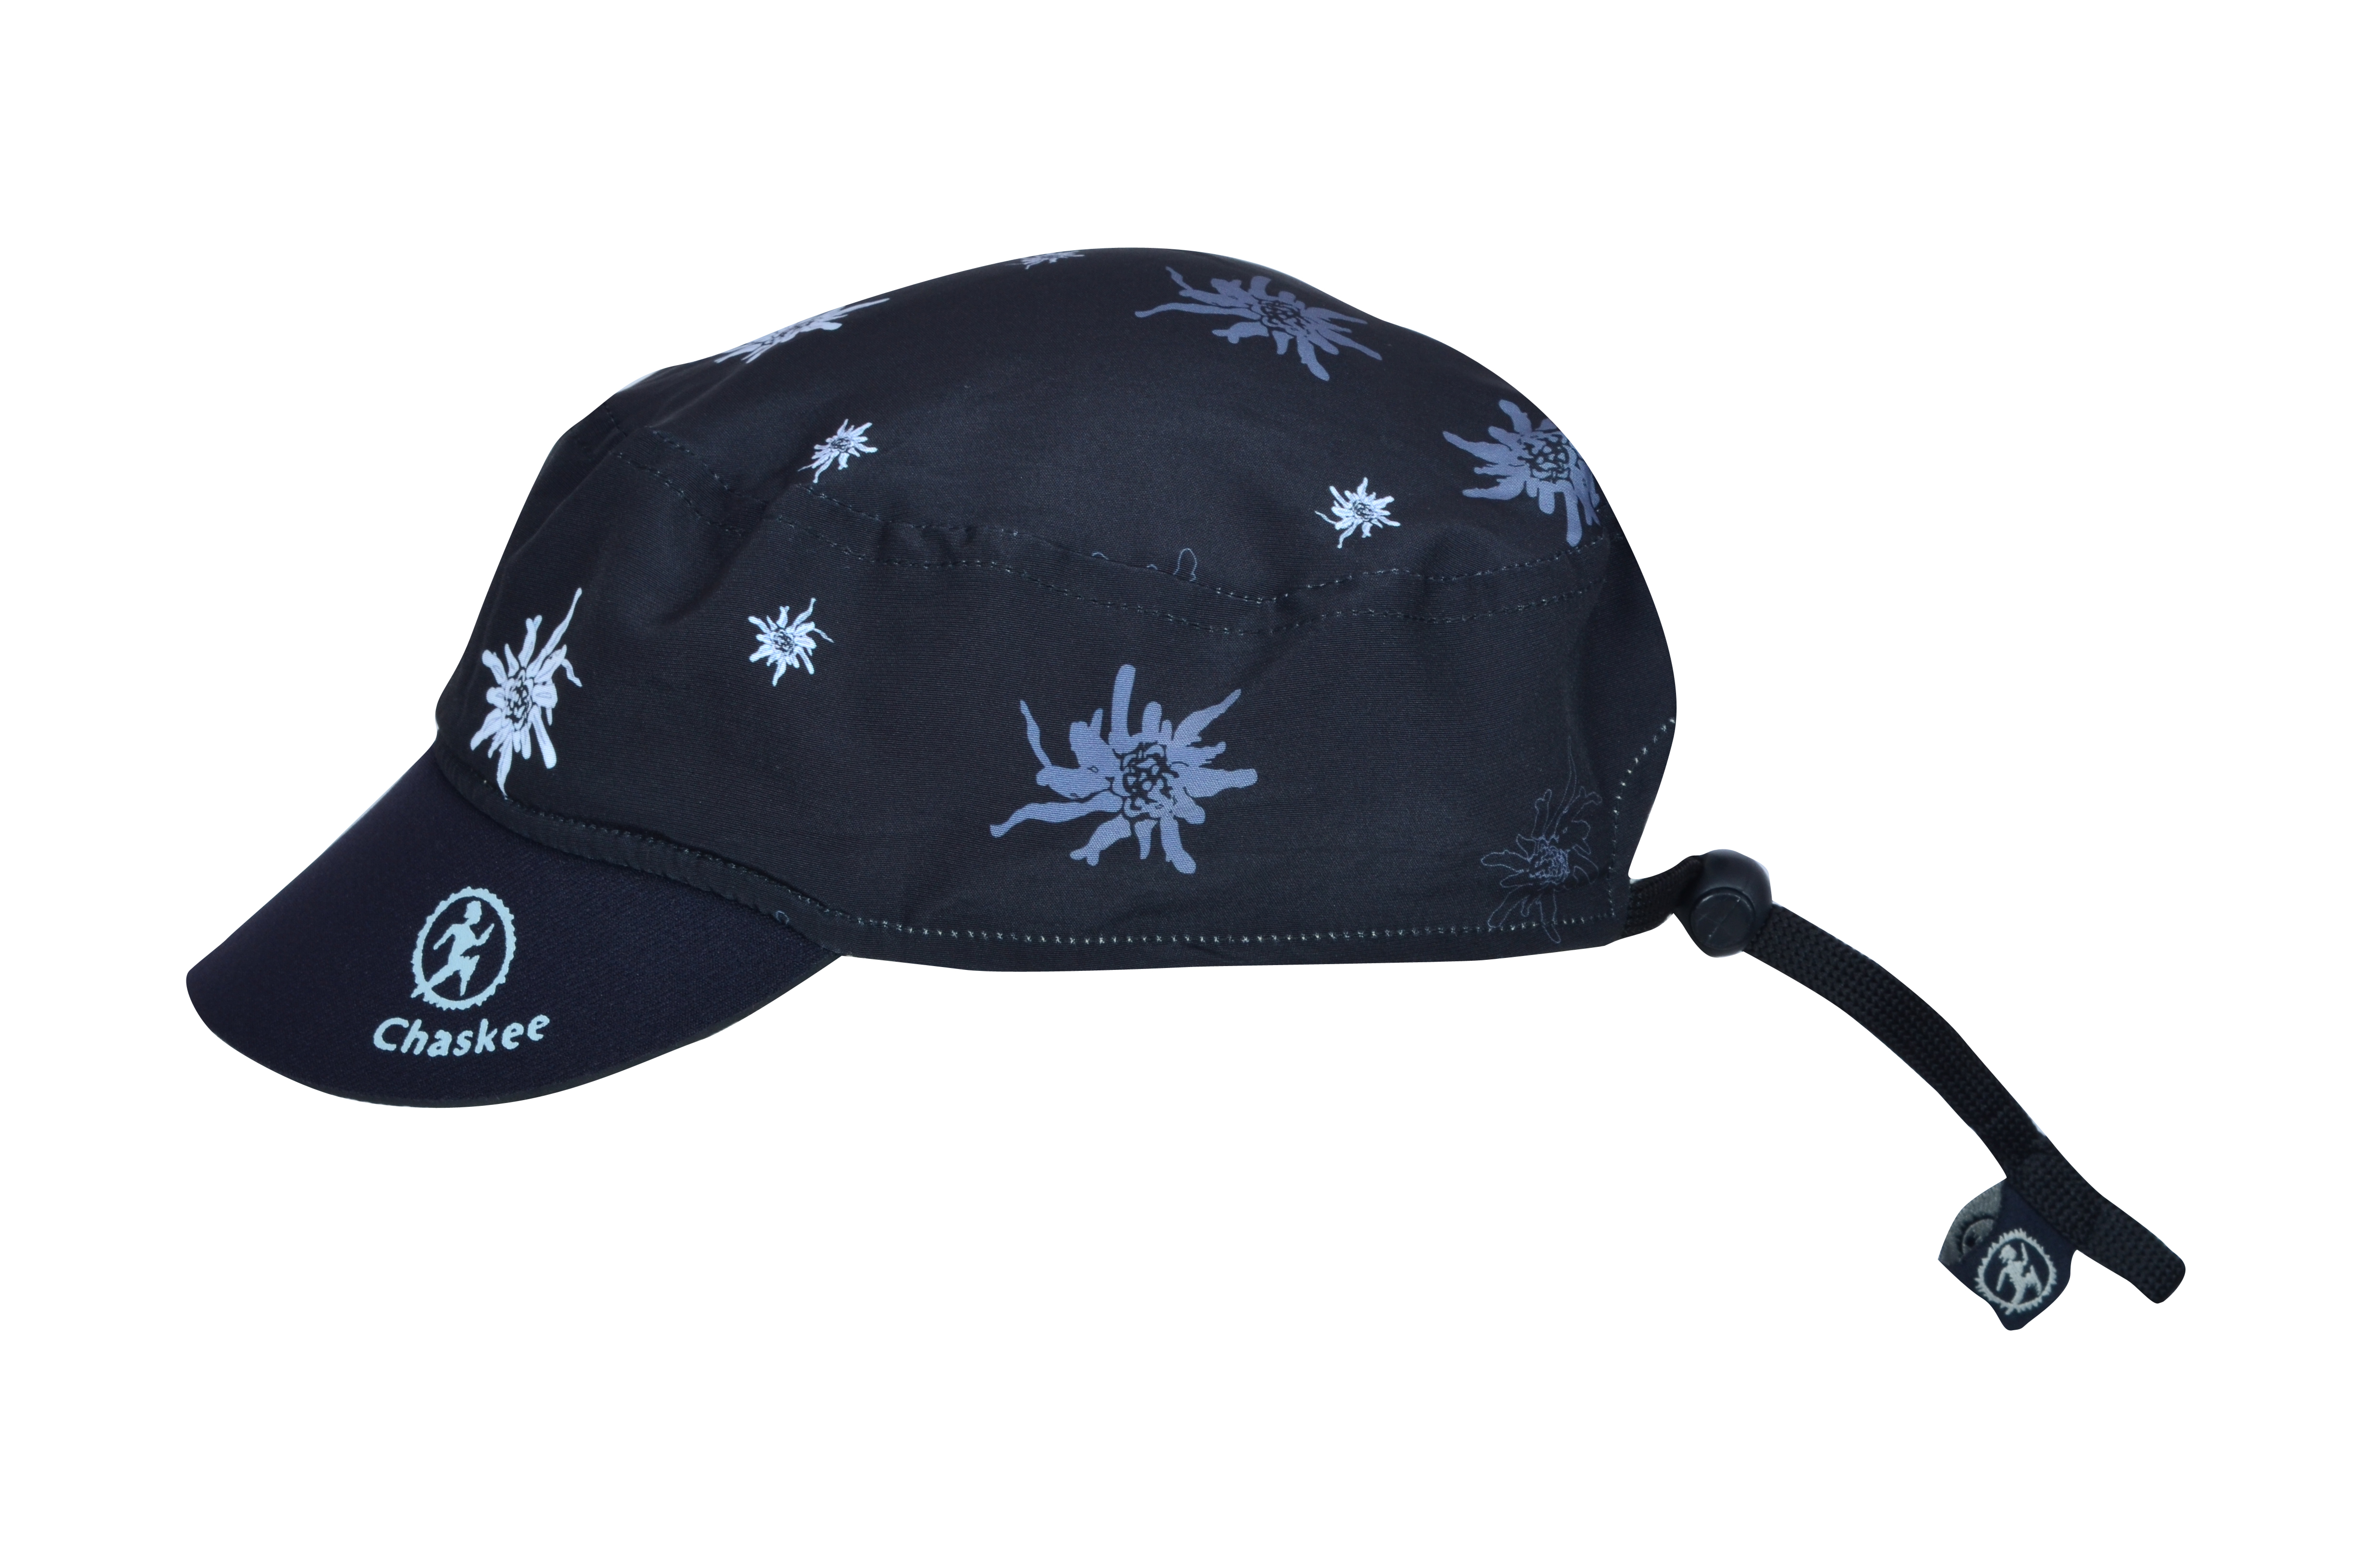 CHASKEE Snap Cap Visor Edelweiss Fashion 